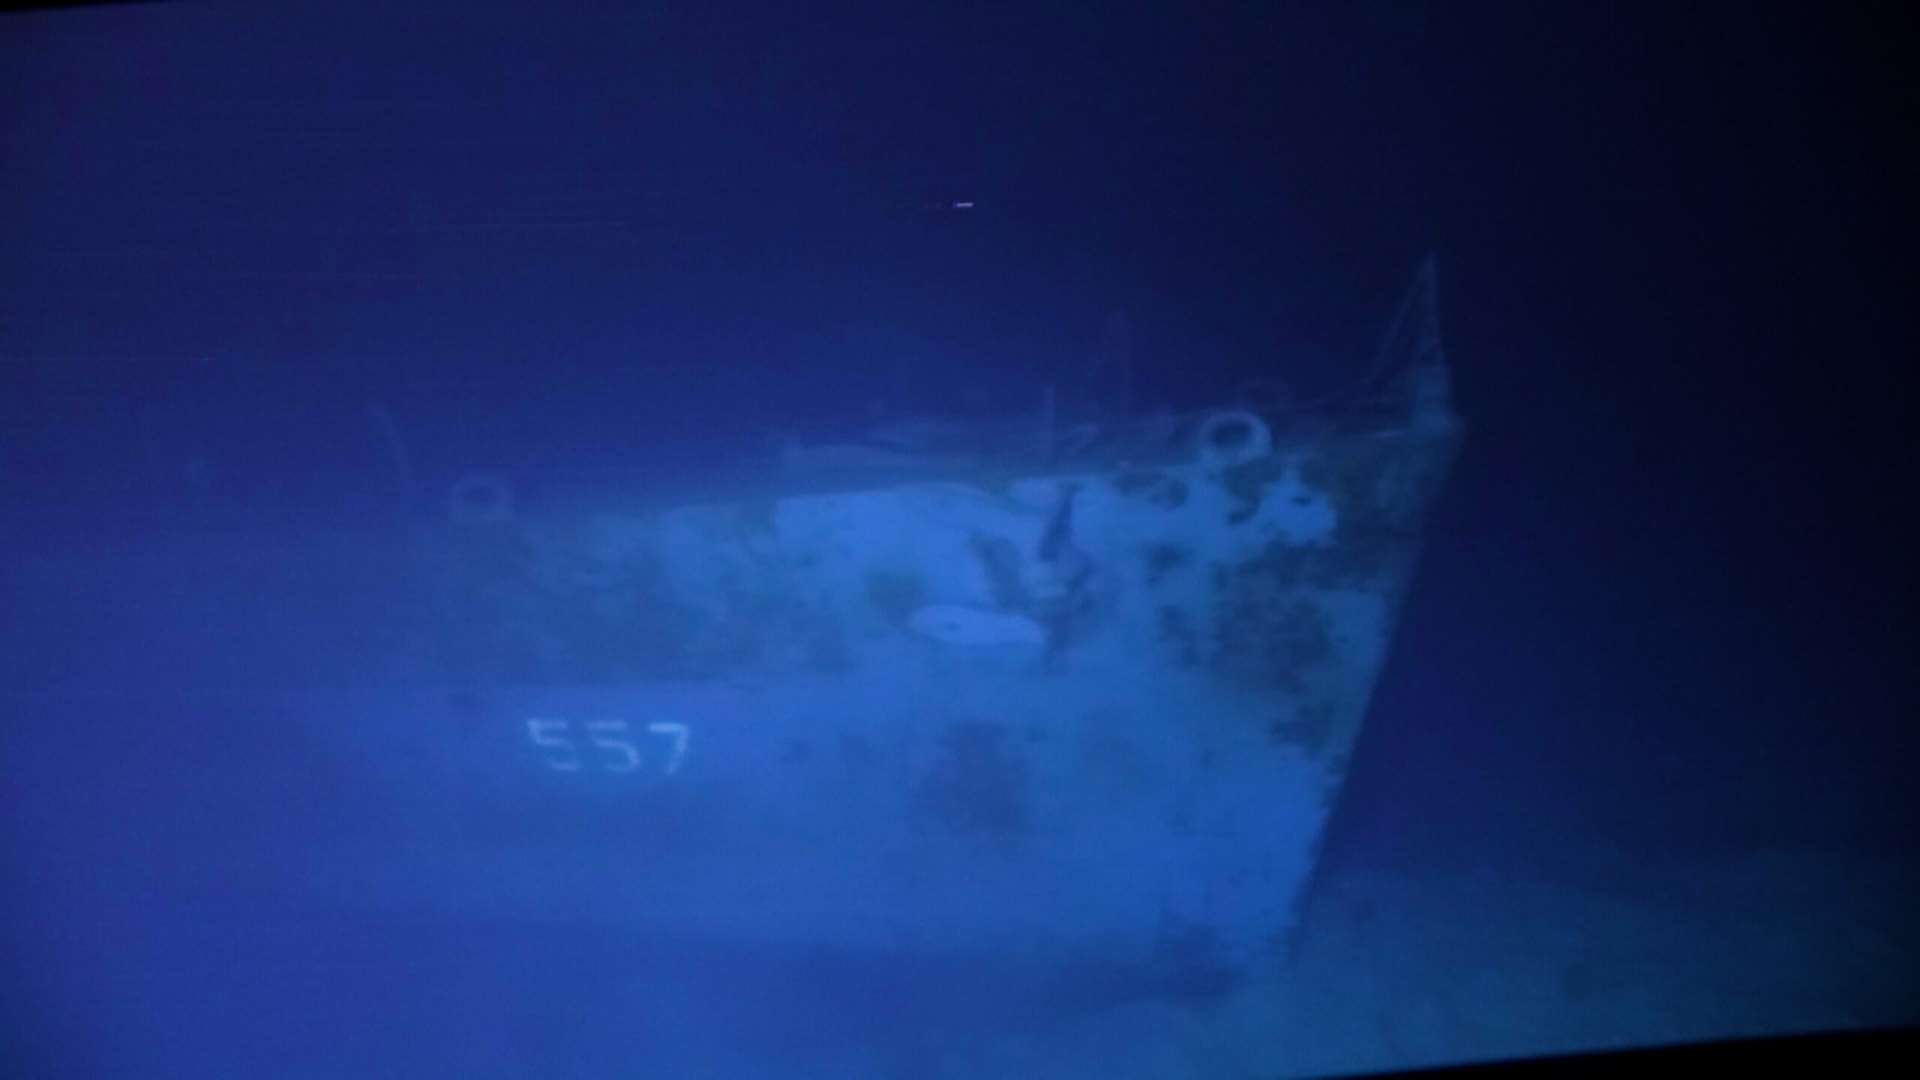 Bow section of the USS Johnston discovered in 21,180 feet of water off Samar in late Mar 2021 and is believed to be the world’s deepest known shipwreck. The wreck was originally discovered in 2019 by the late Paul Allen’s team.